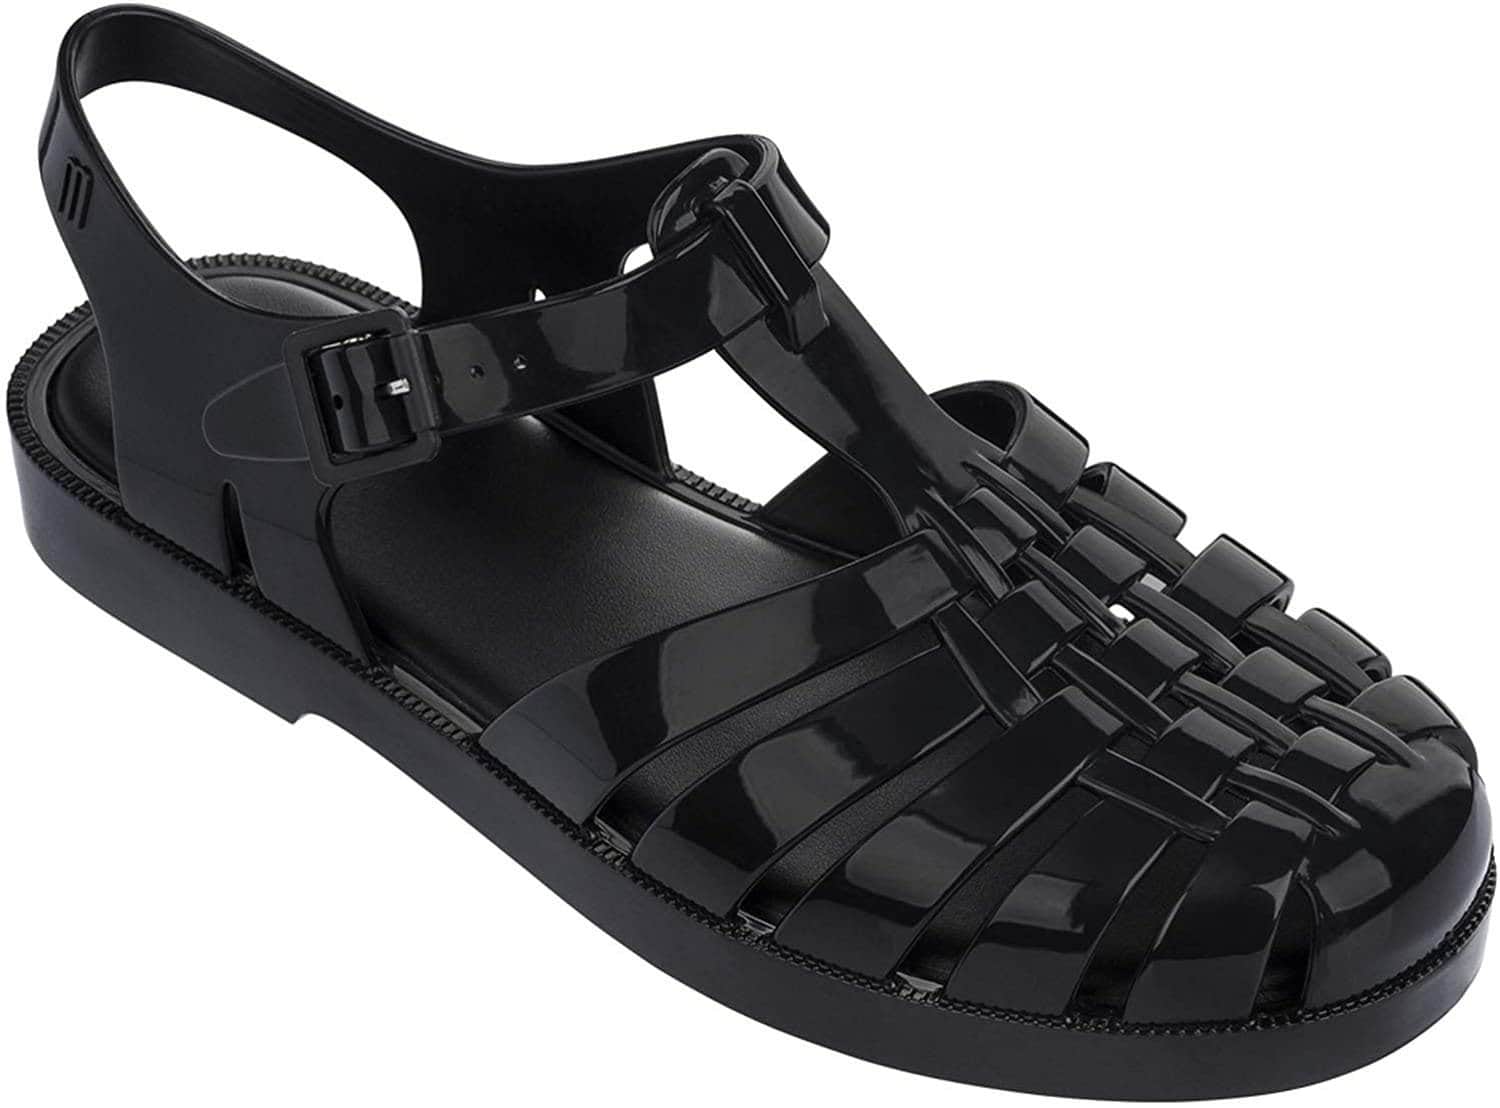 munt redden musicus The 16 Best Jelly Shoes and Clear Sandals for Women and Kids